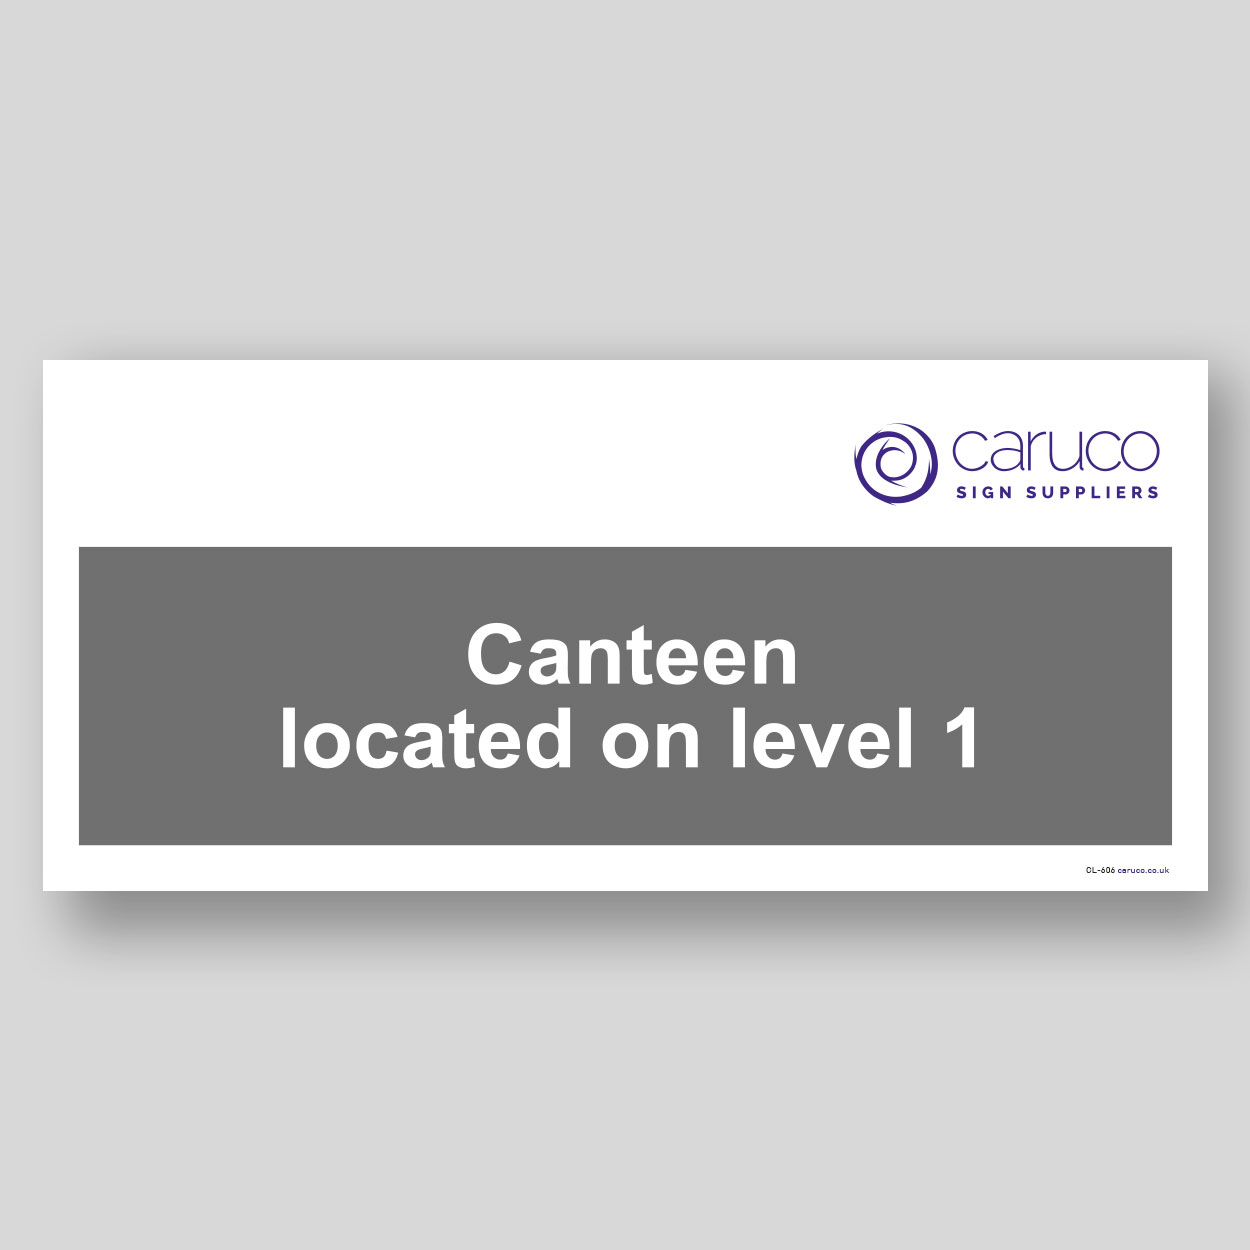 CL-606 Canteen on level 1